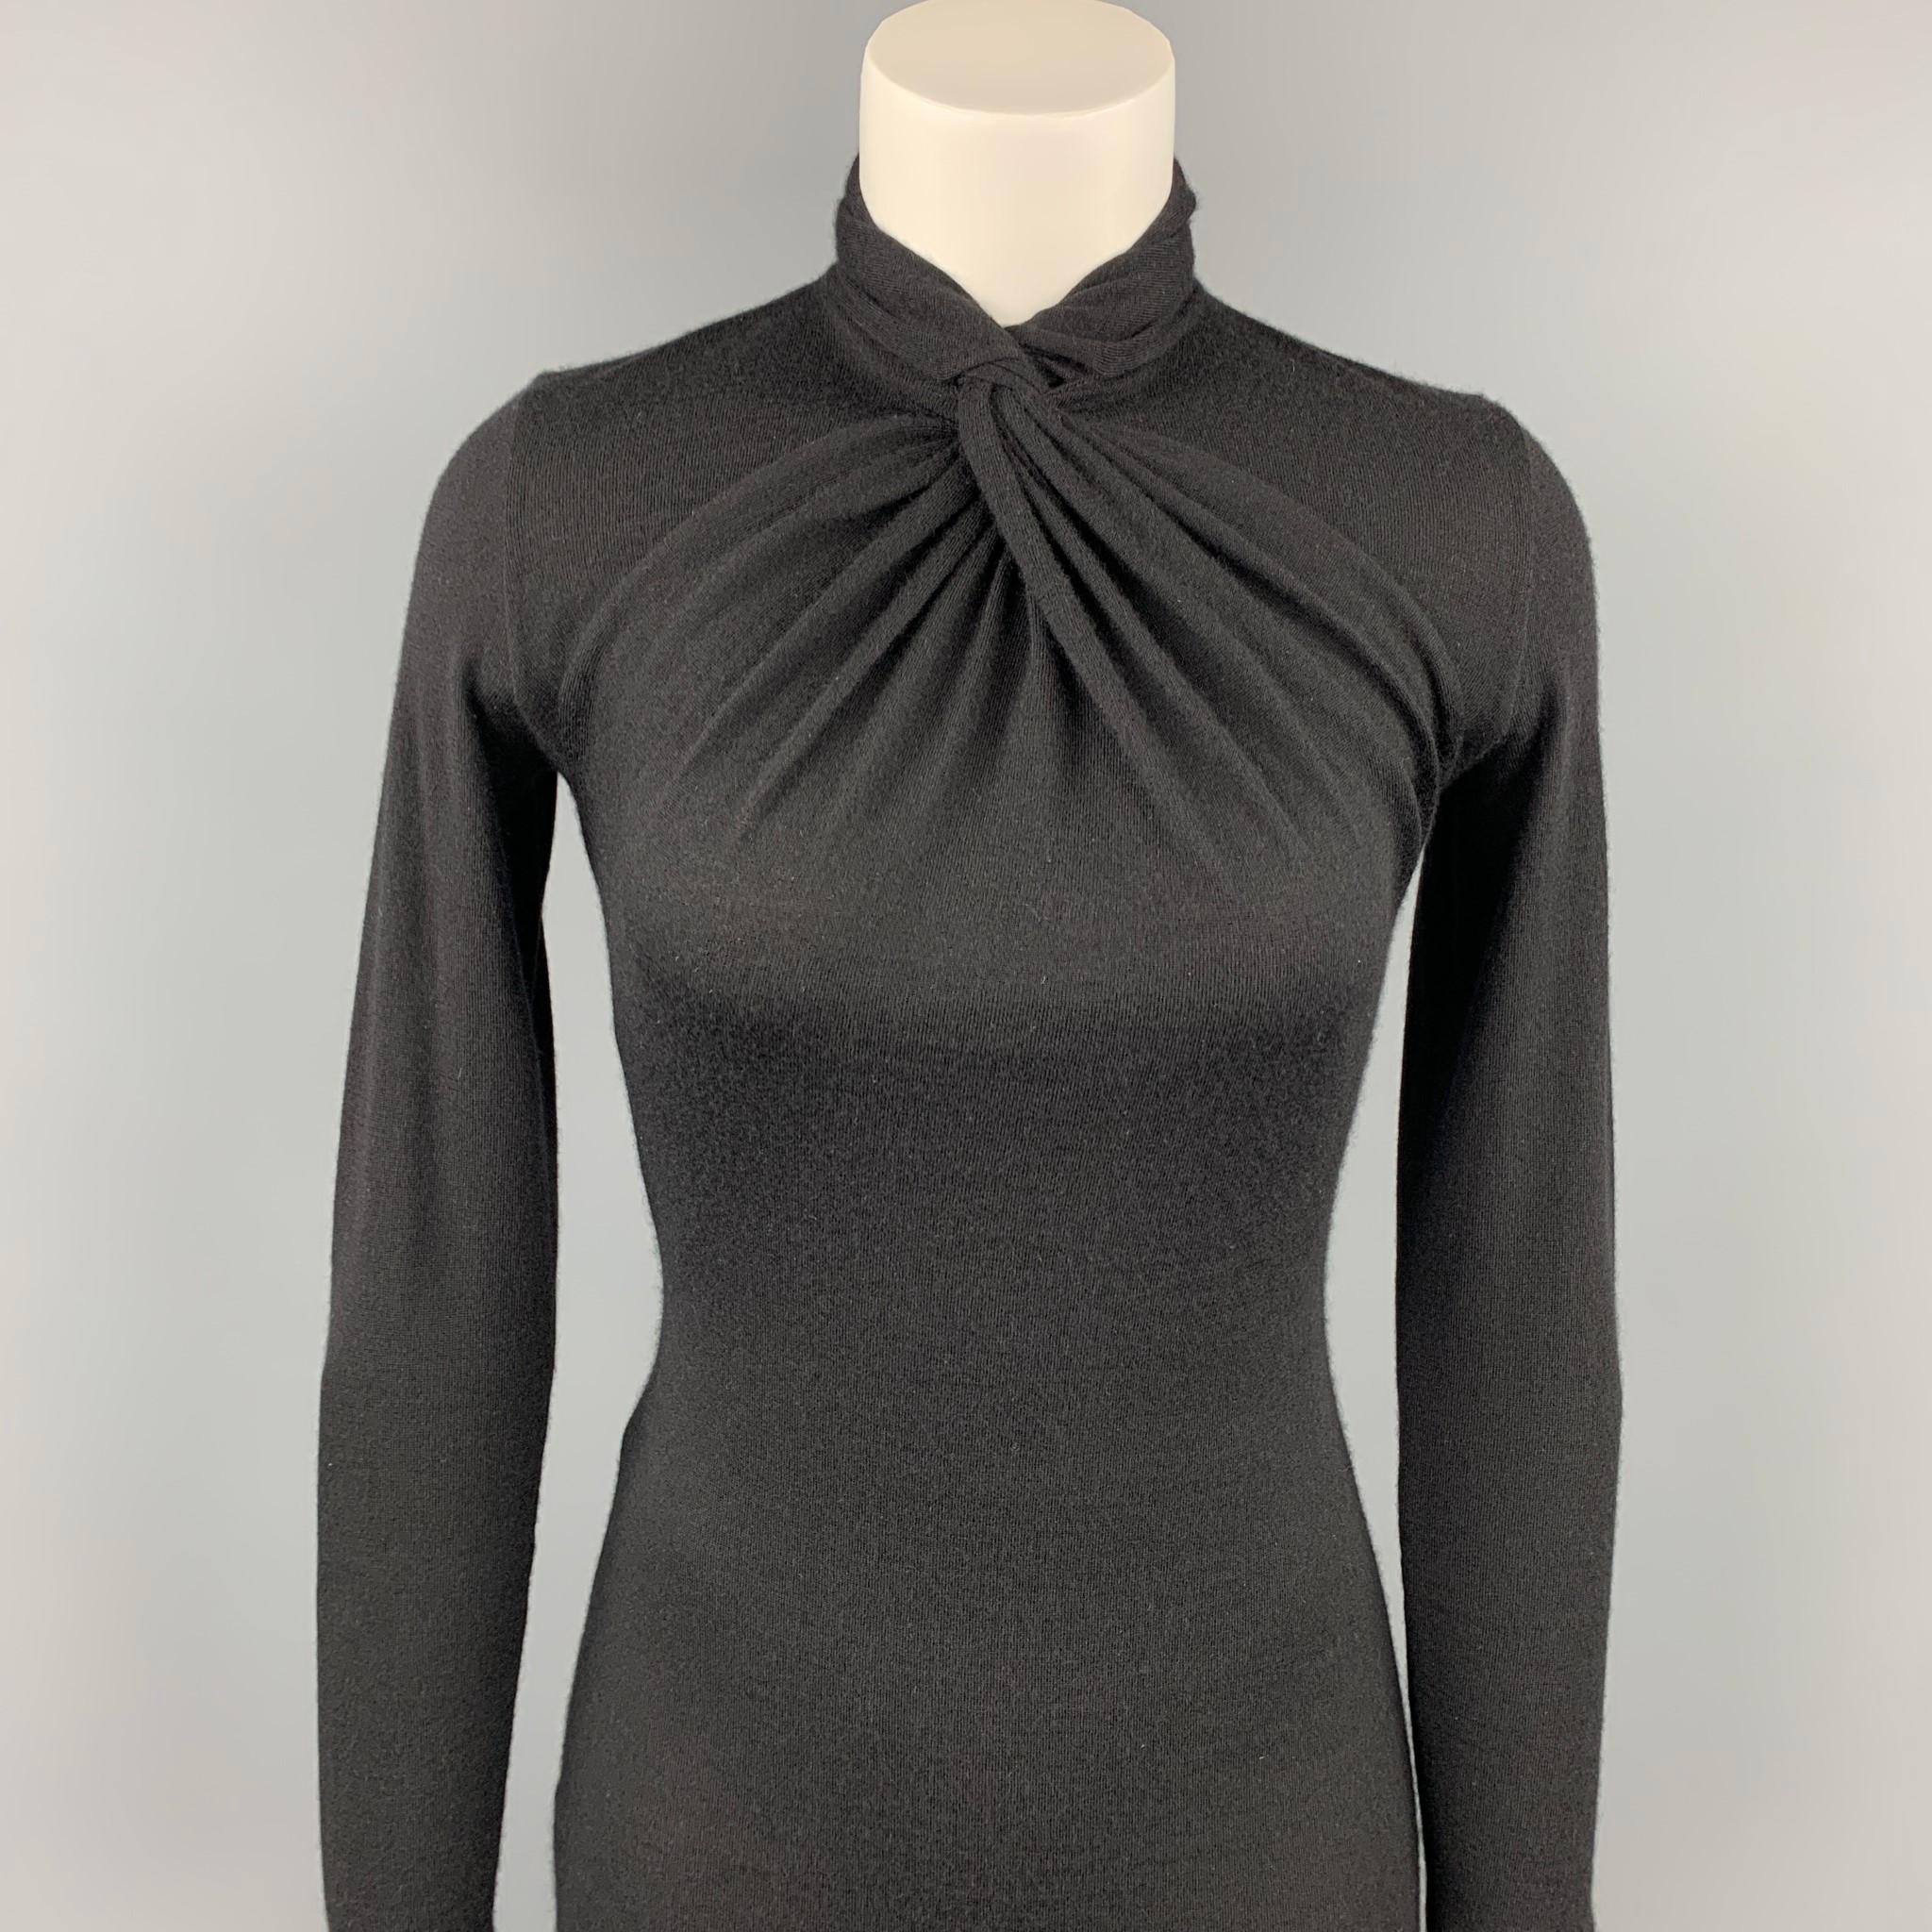 RALPH LAUREN dress comes in a black knitted cashmere featuring a high collar, long sleeves, and a back button closure.

Very Good Pre-Owned Condition.
Marked: No fabric tag

Measurements:

Shoulder: 14.5 in.
Bust: 31 in.
Waist: 26 in.
Hip: 32